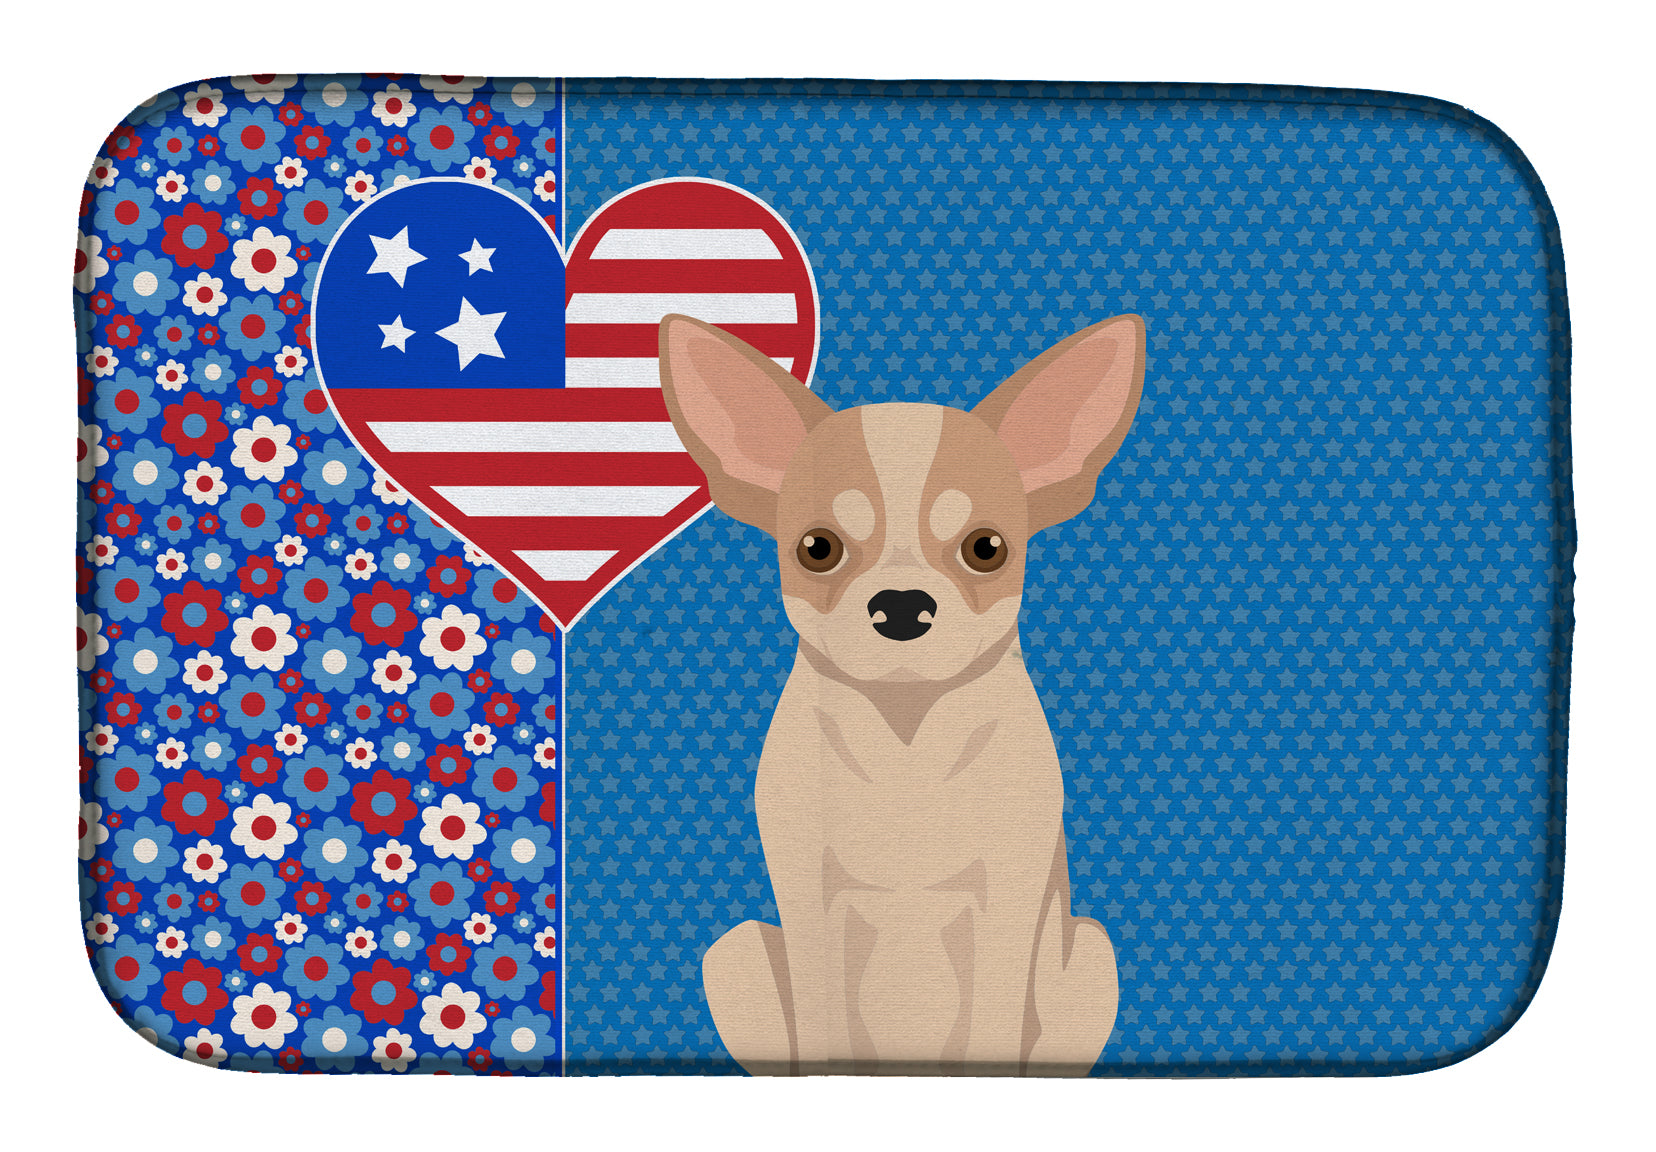 Fawn and White Chihuahua USA American Dish Drying Mat